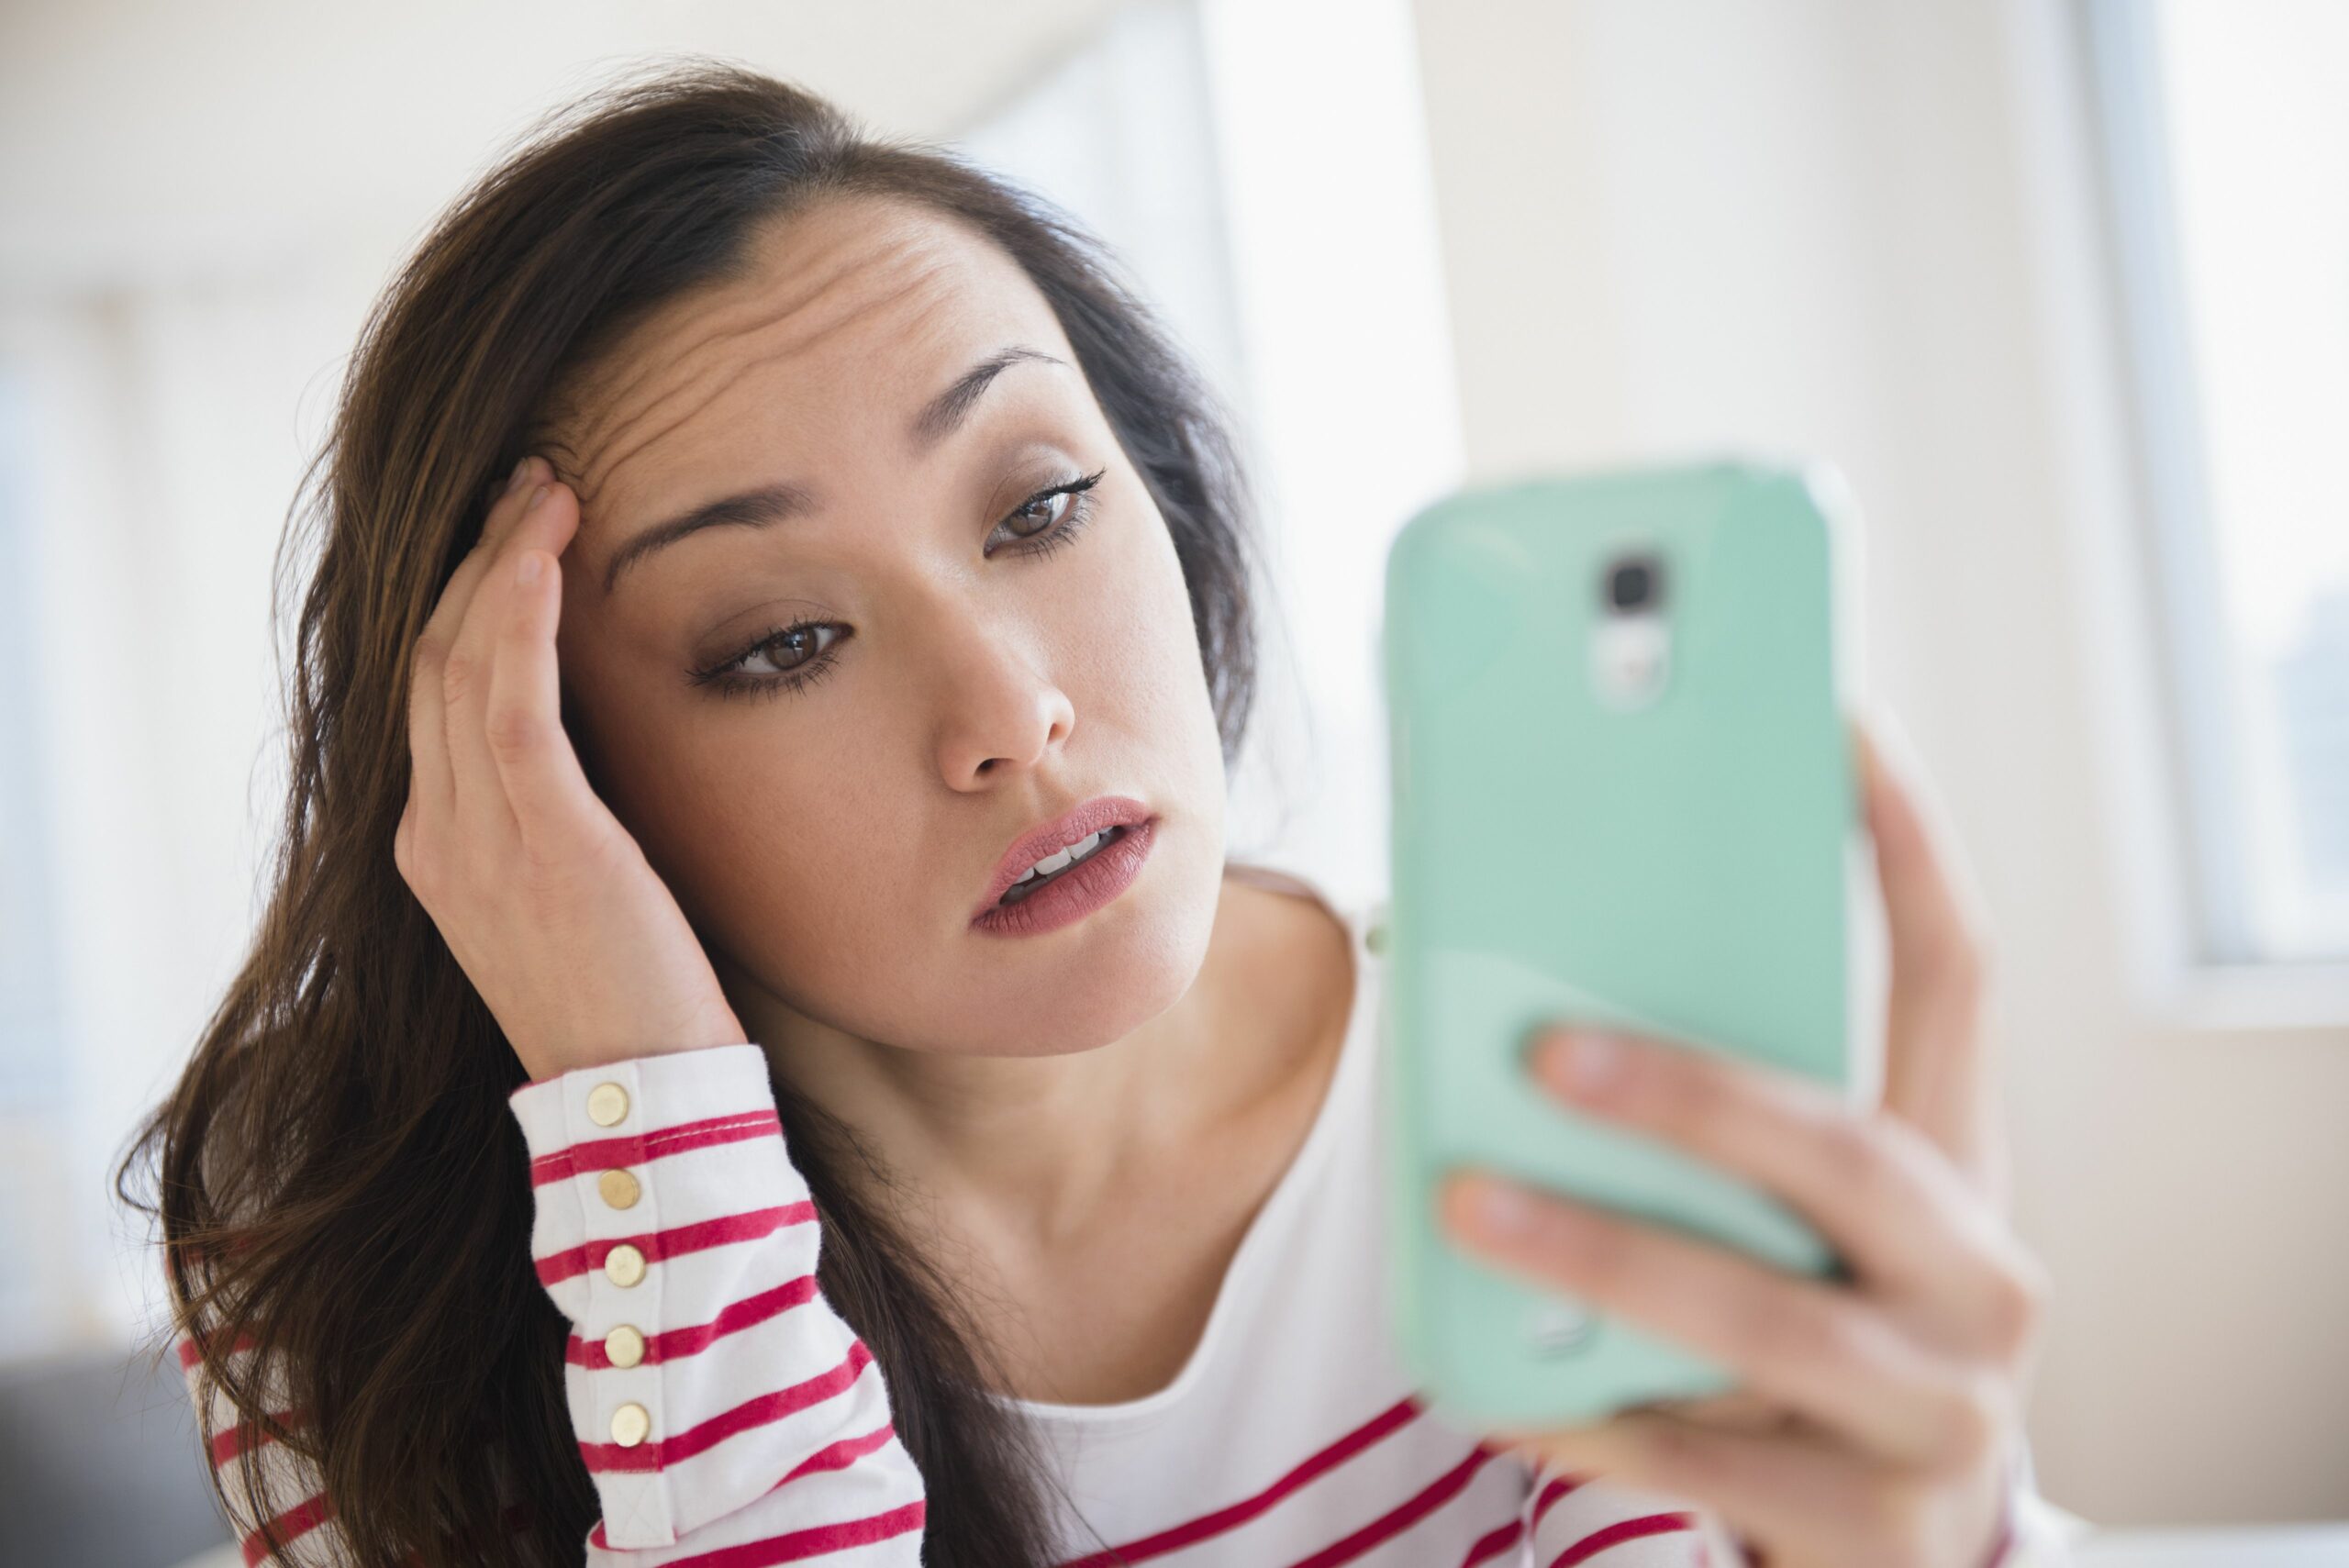 stressed woman using cell phone 649660615 5c5355e34cedfd0001efd4cb scaled